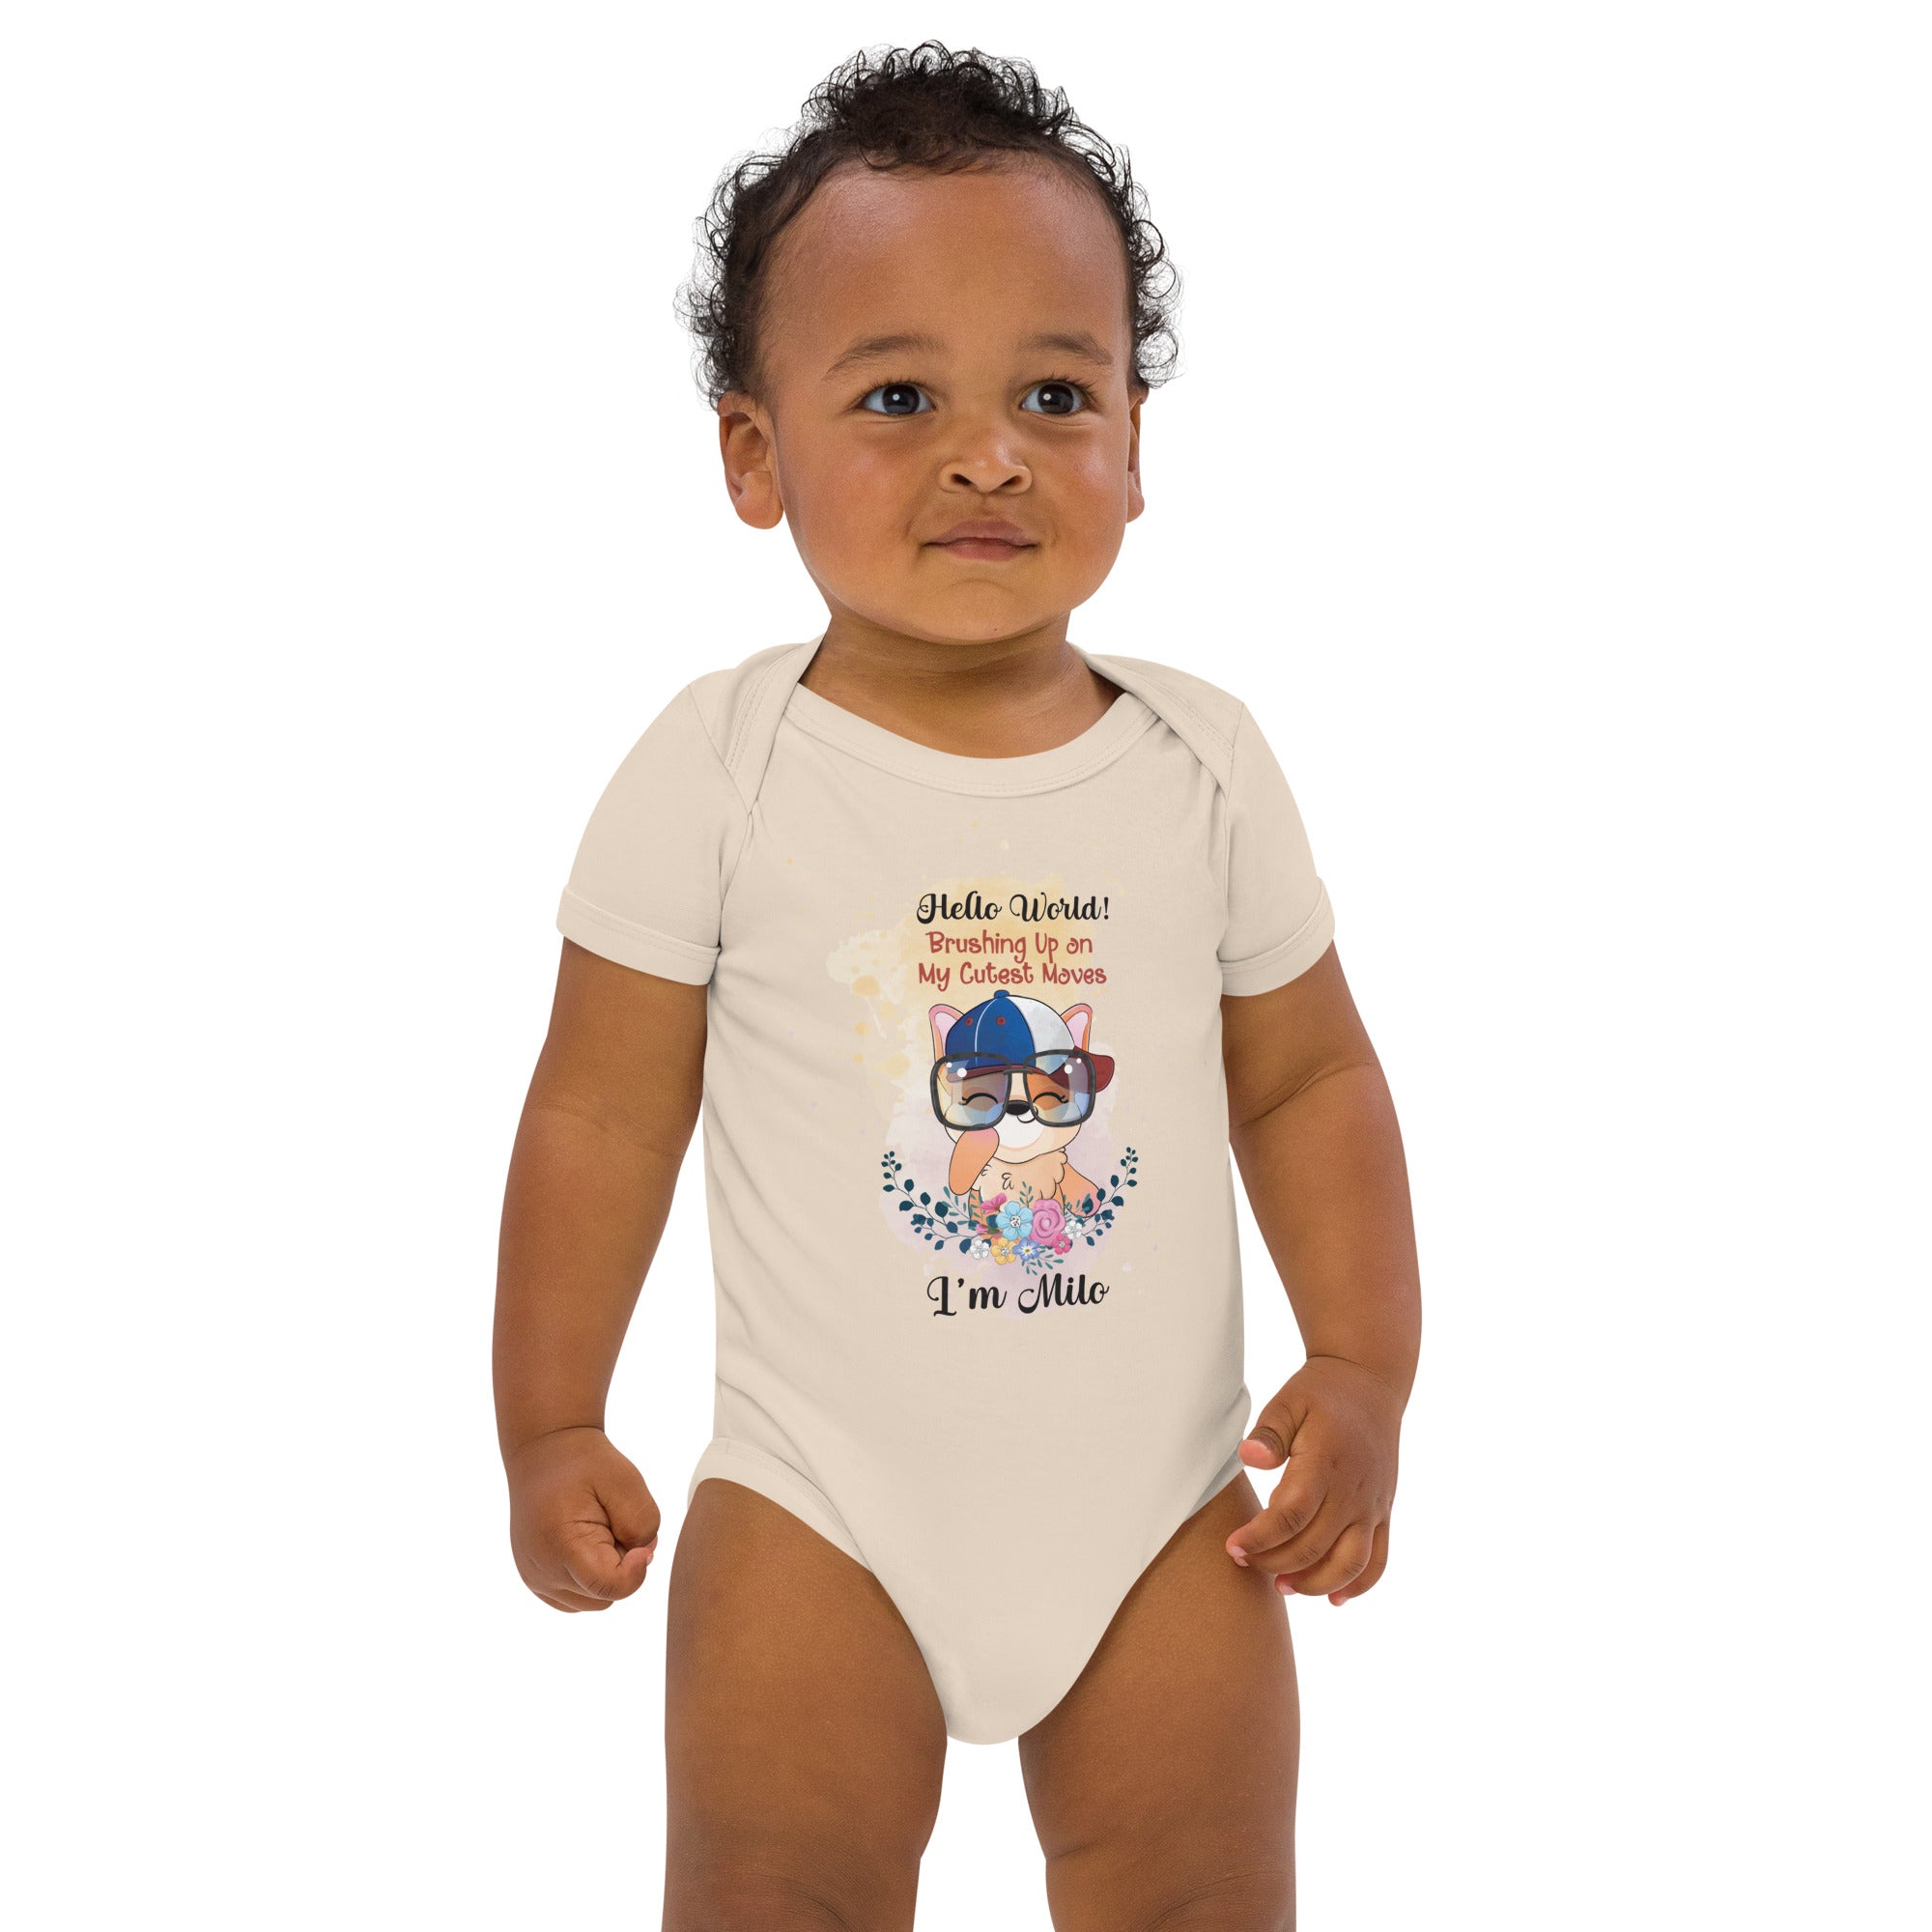 Cute Baby Outfits, Newborn Onesies, Personalized Gifts for Babies